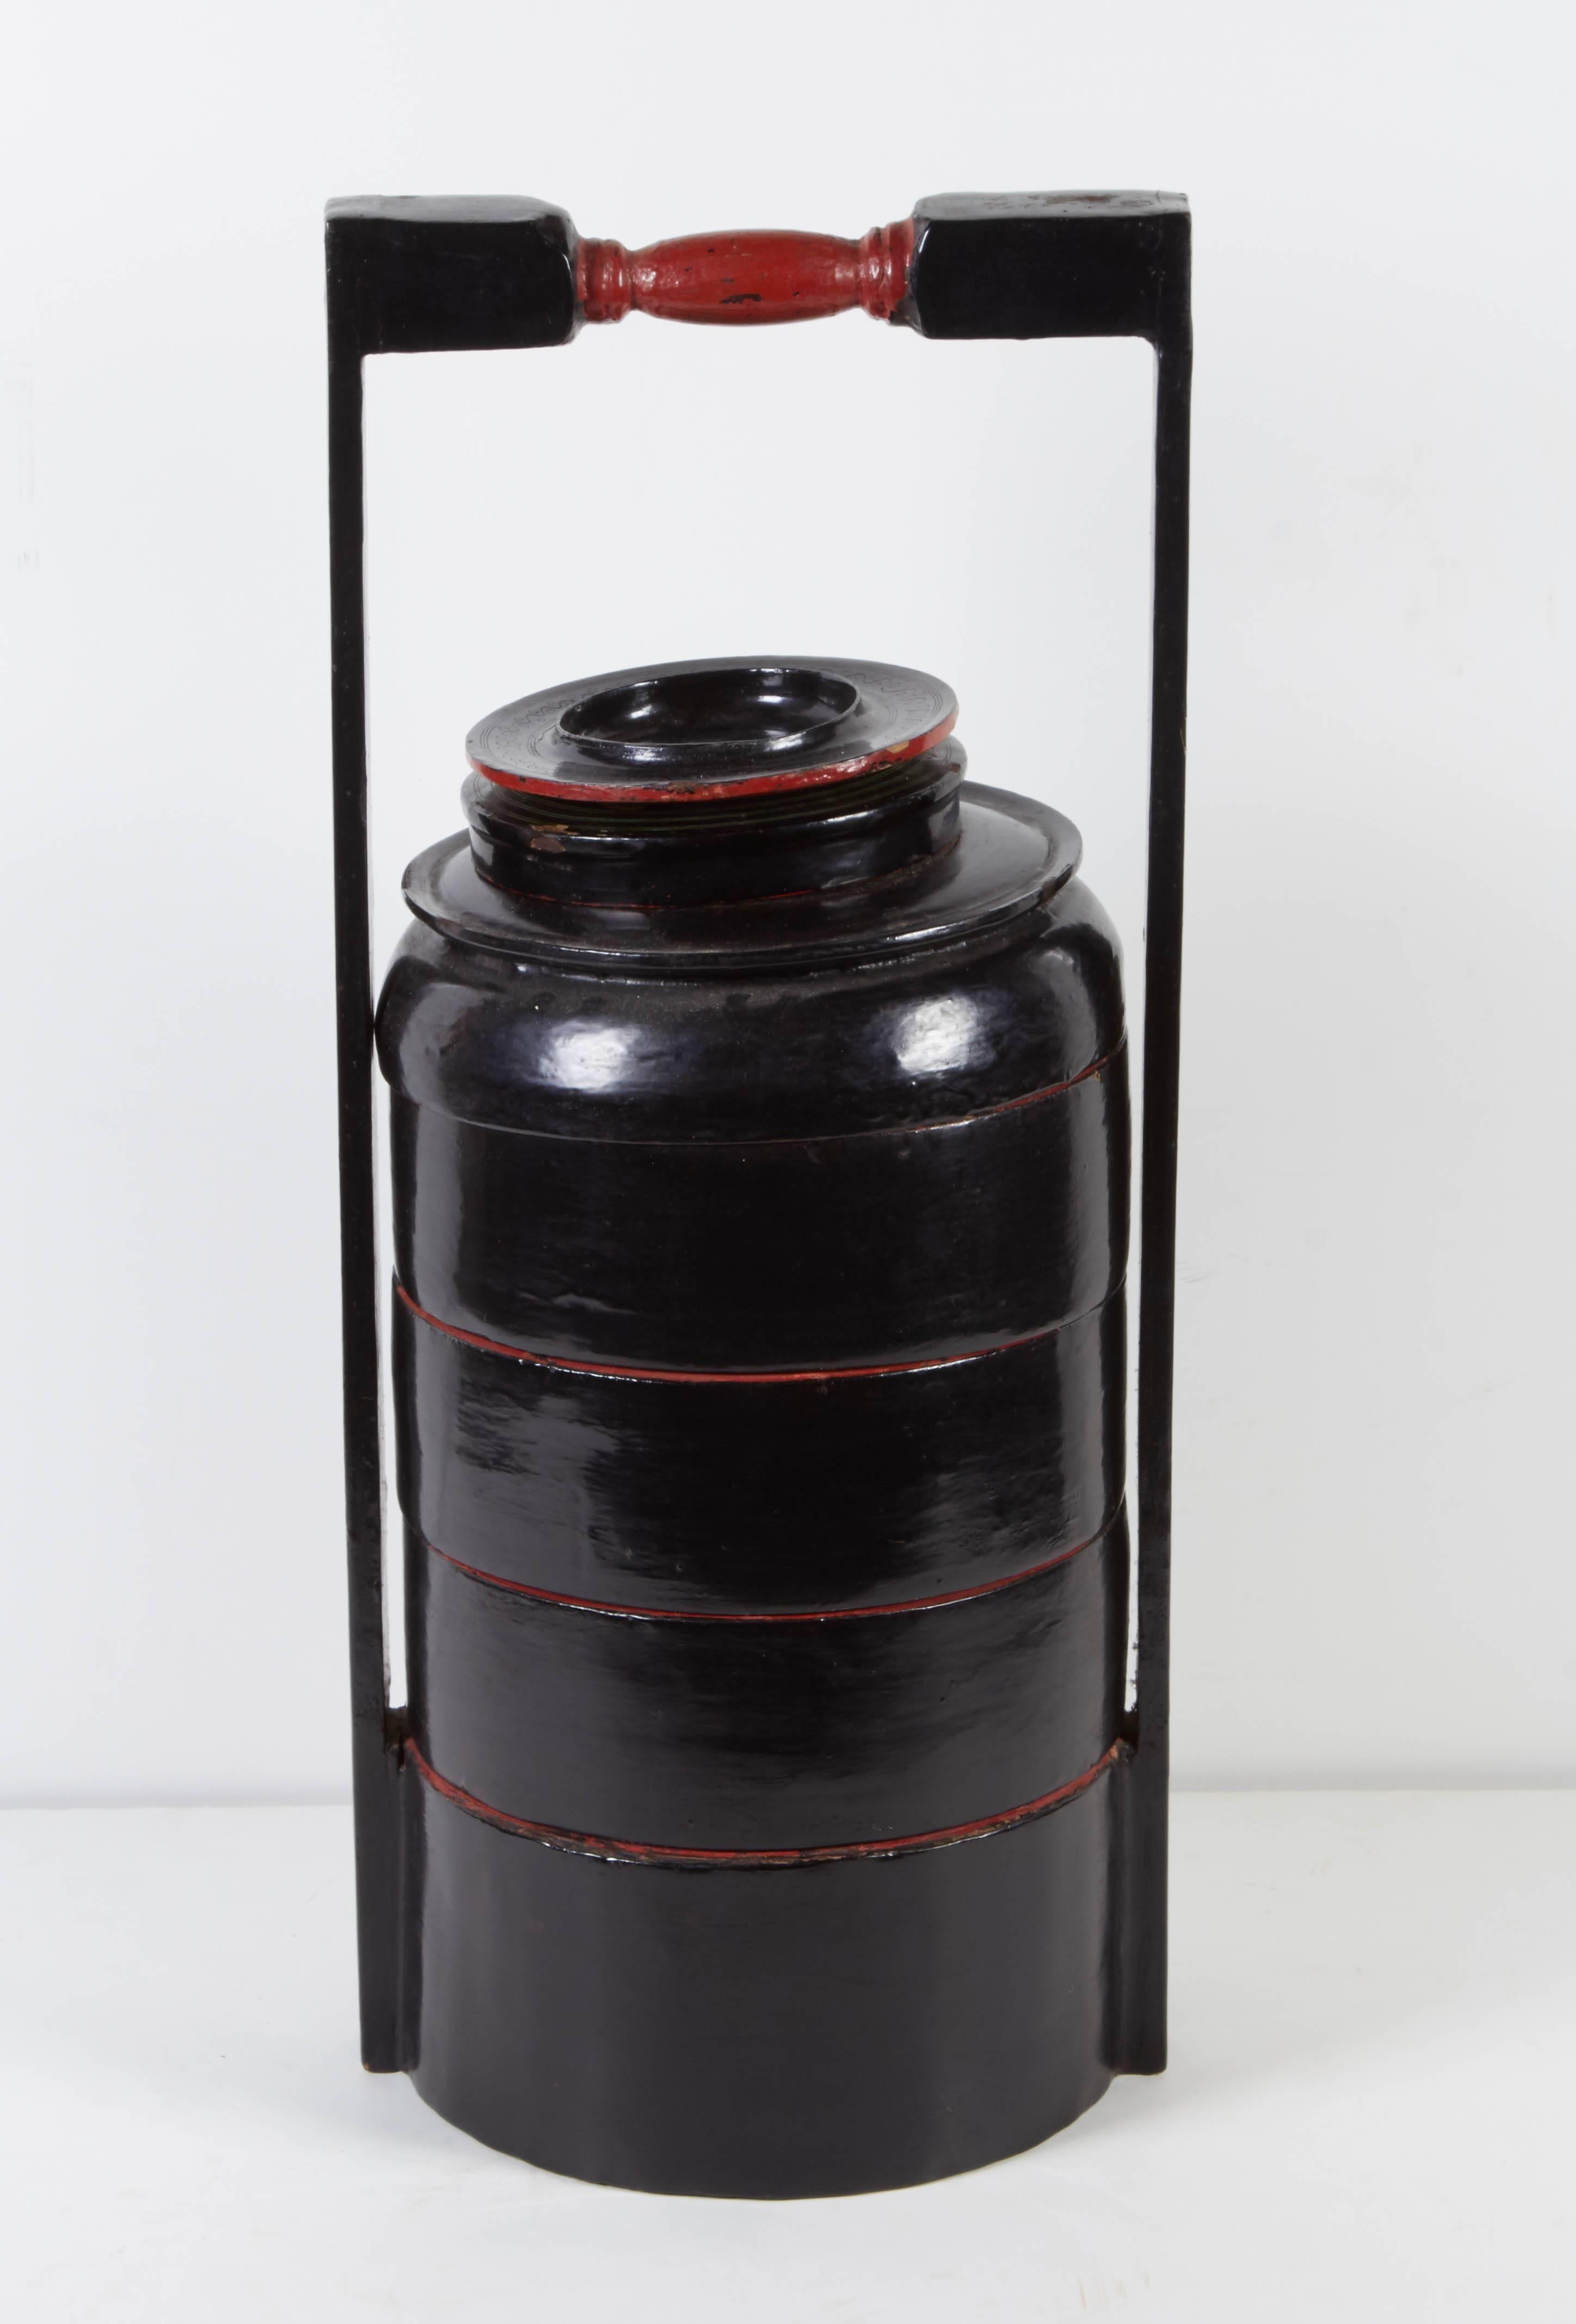 A beautifully lacquered vintage Burmese multilayered food container with five separate compartments. The vibrant red interior complements the elegant form of the black lacquer exterior. See additional images for interior.

L328.